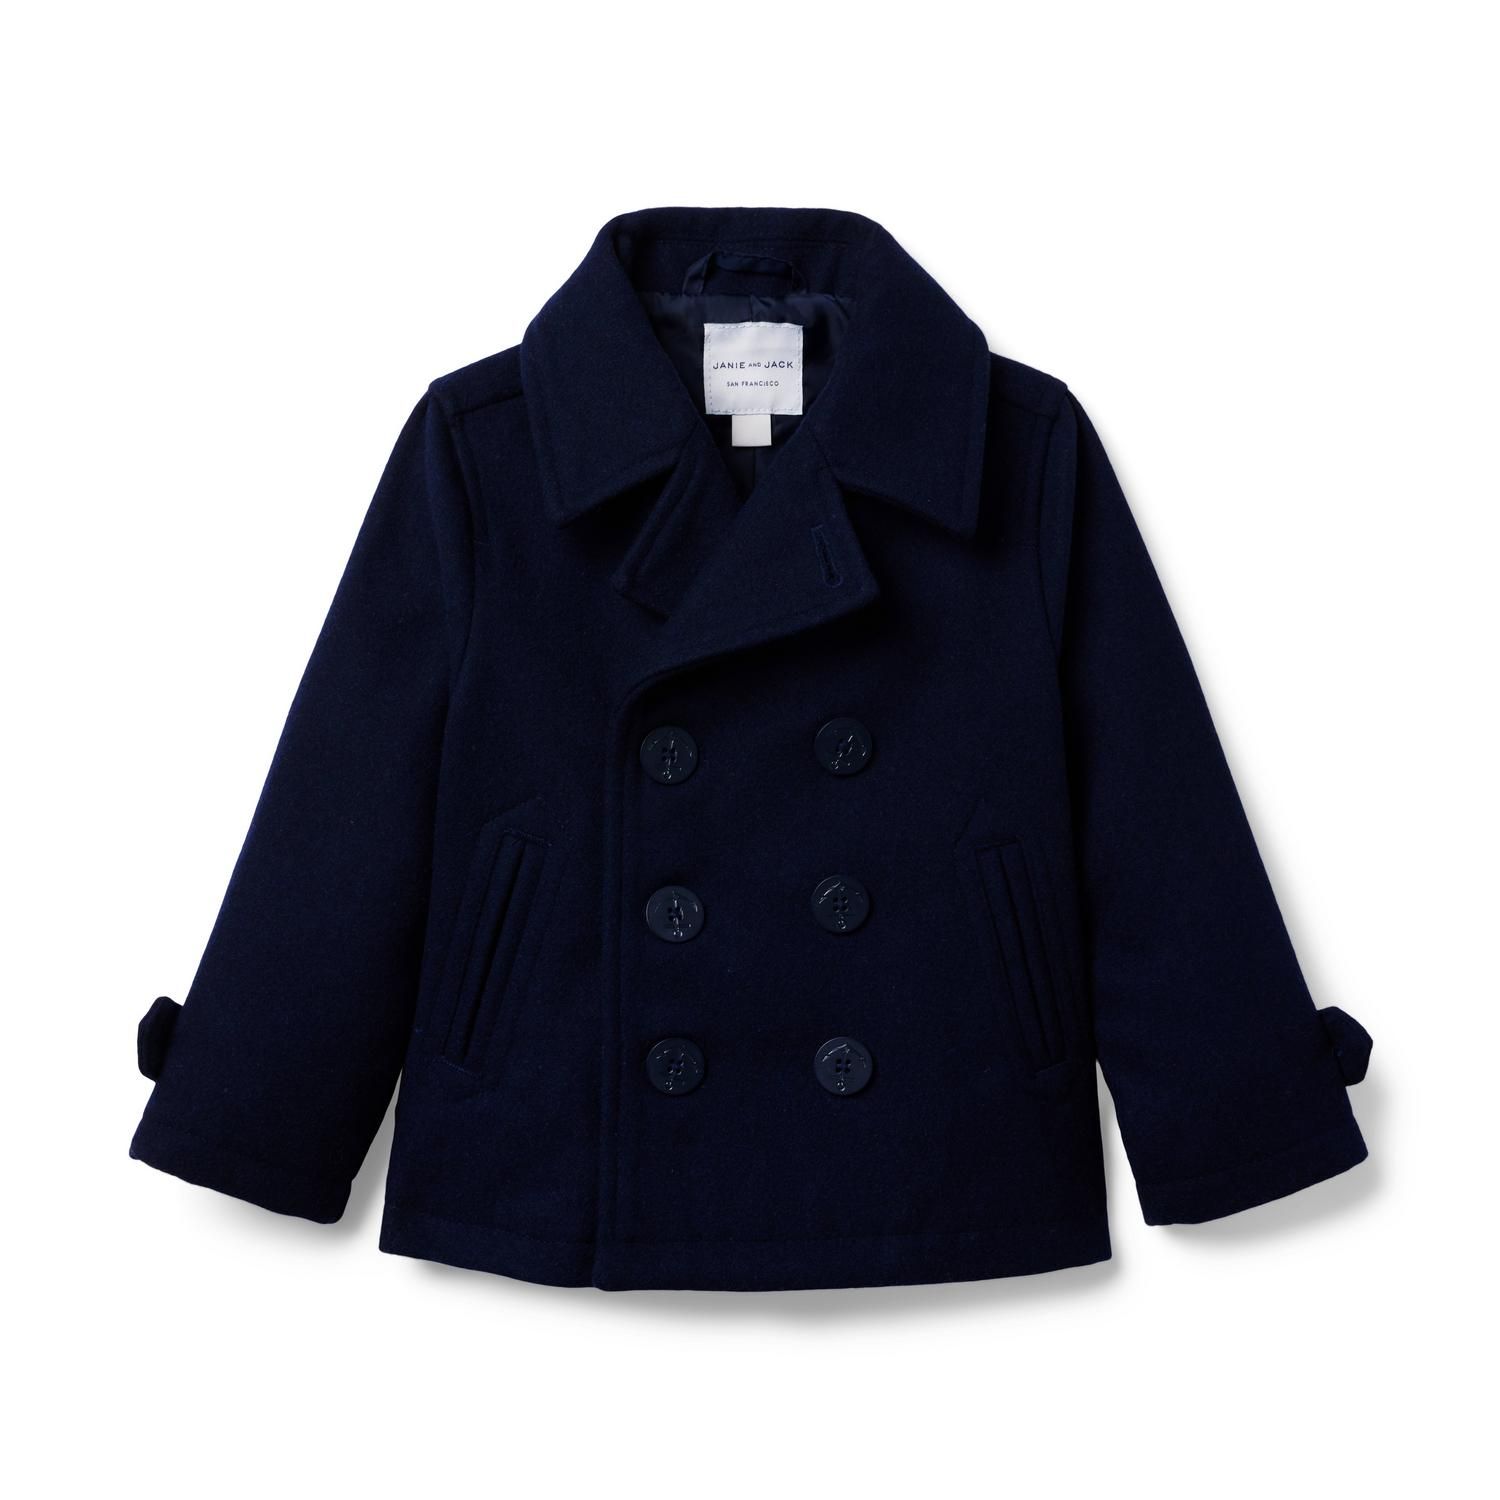 The Wool Holiday Coat | Janie and Jack